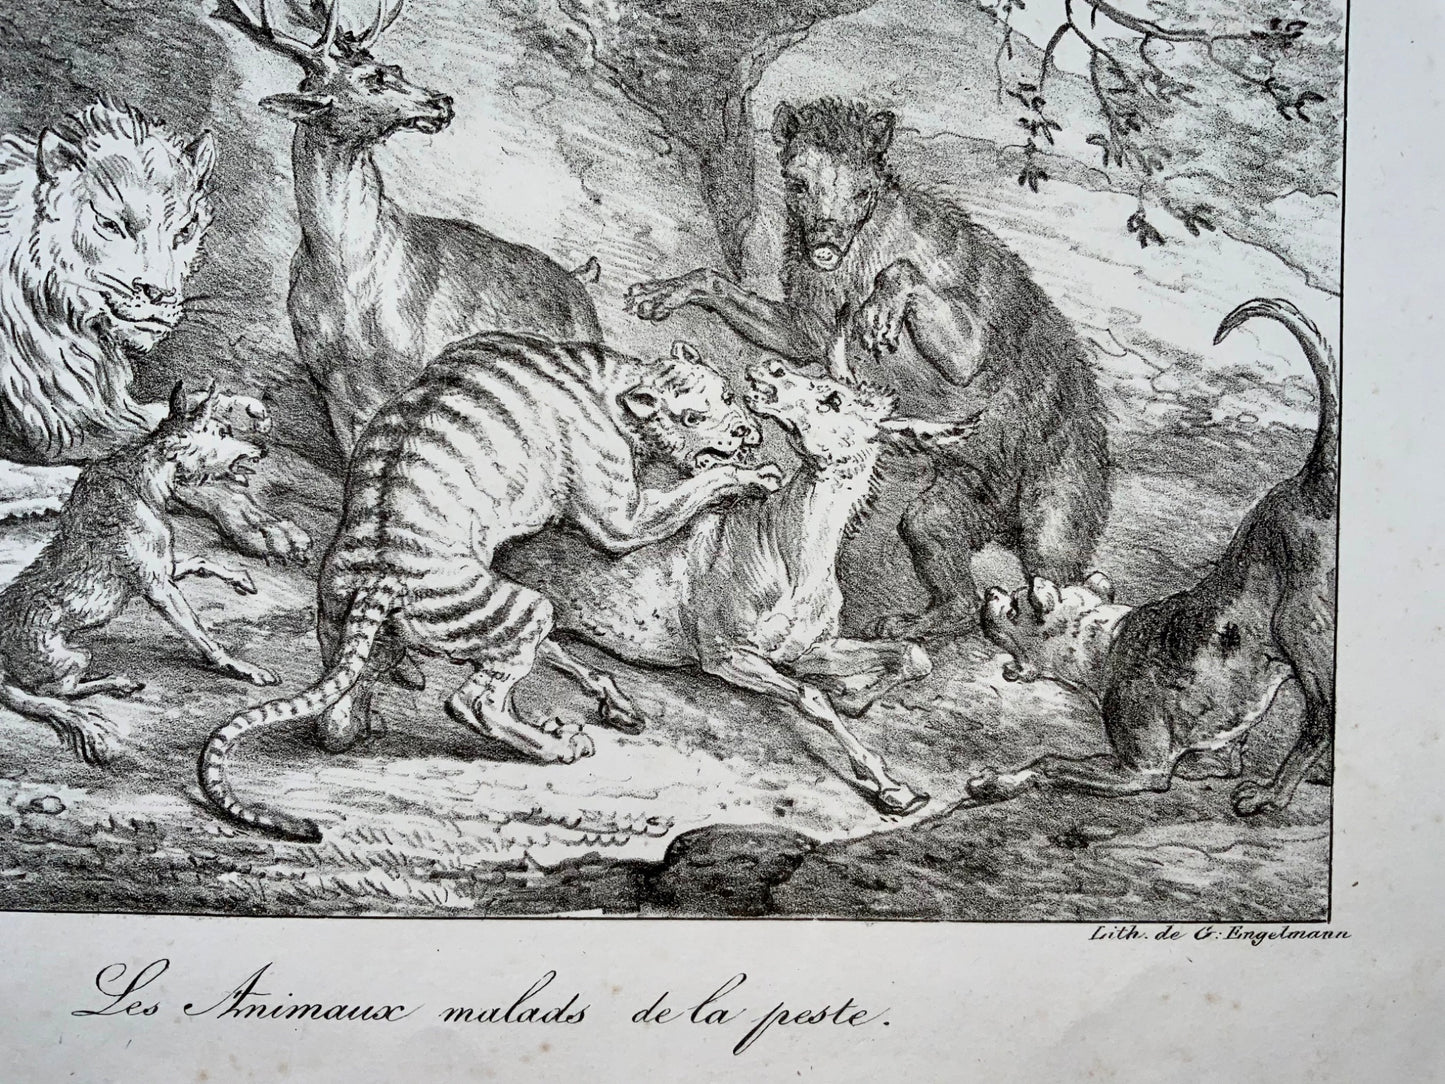 1818 ‘Incunabula of Lithography’ Carle Vernet, G. Engelmann, Bestiary, Lion